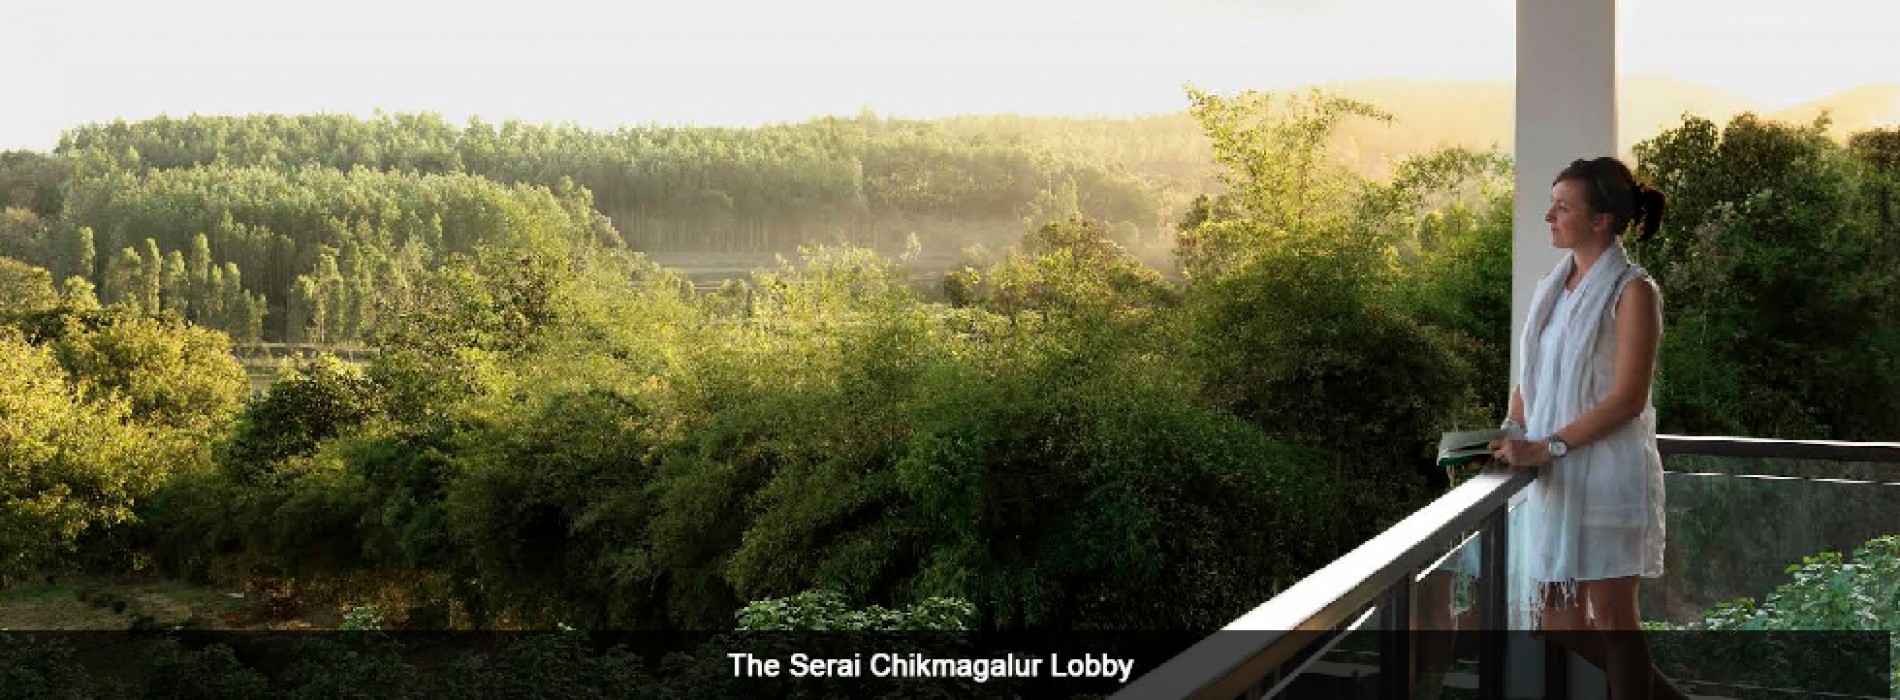 Unweekend your getaways this March with The Serai Benefits starting from Rs. 27000/- onwards